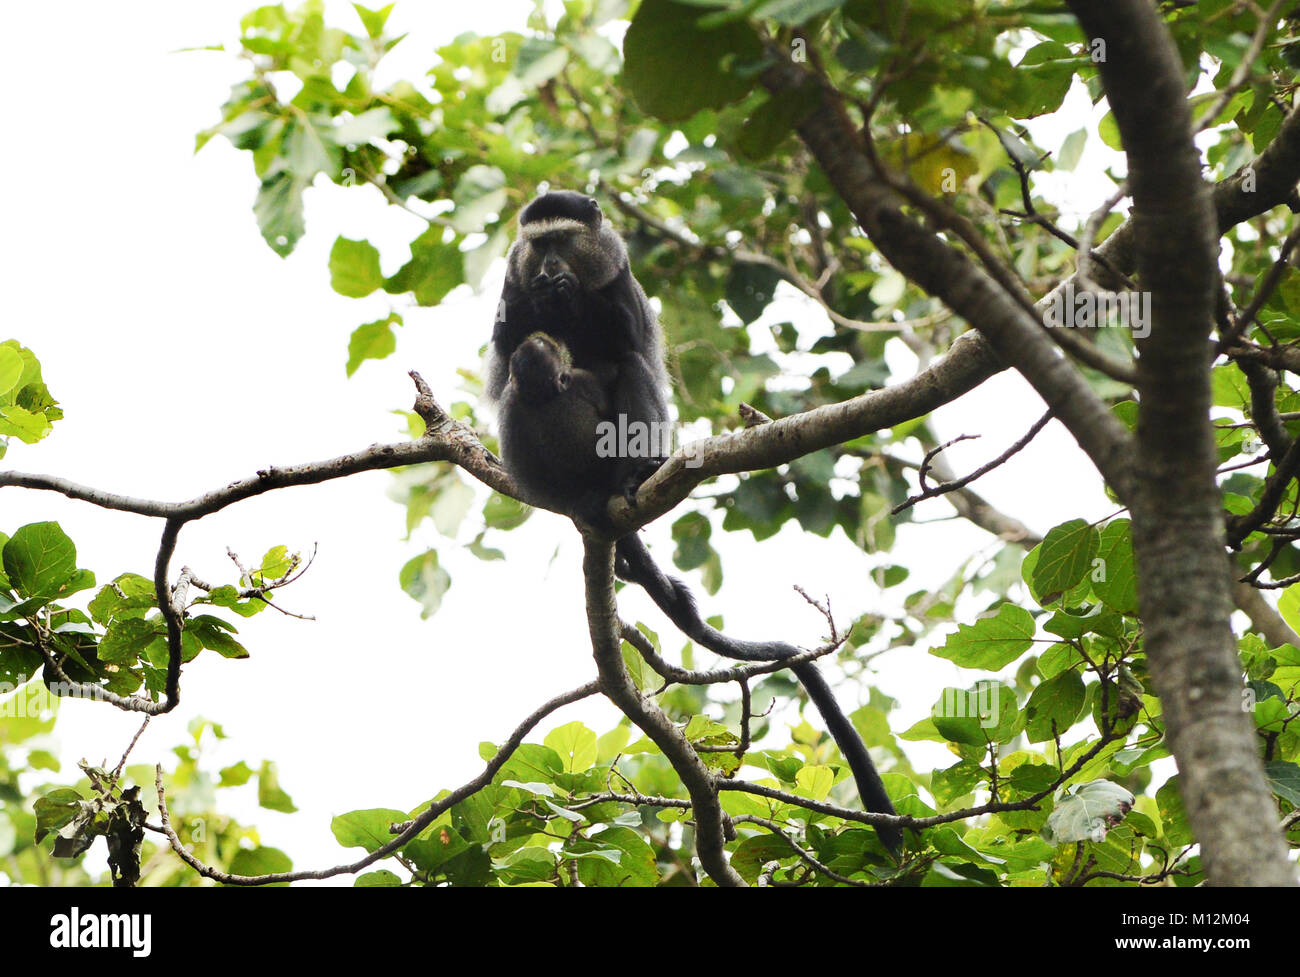 A Blue Monkey in Virunga national park in Eastern Congo. Stock Photo